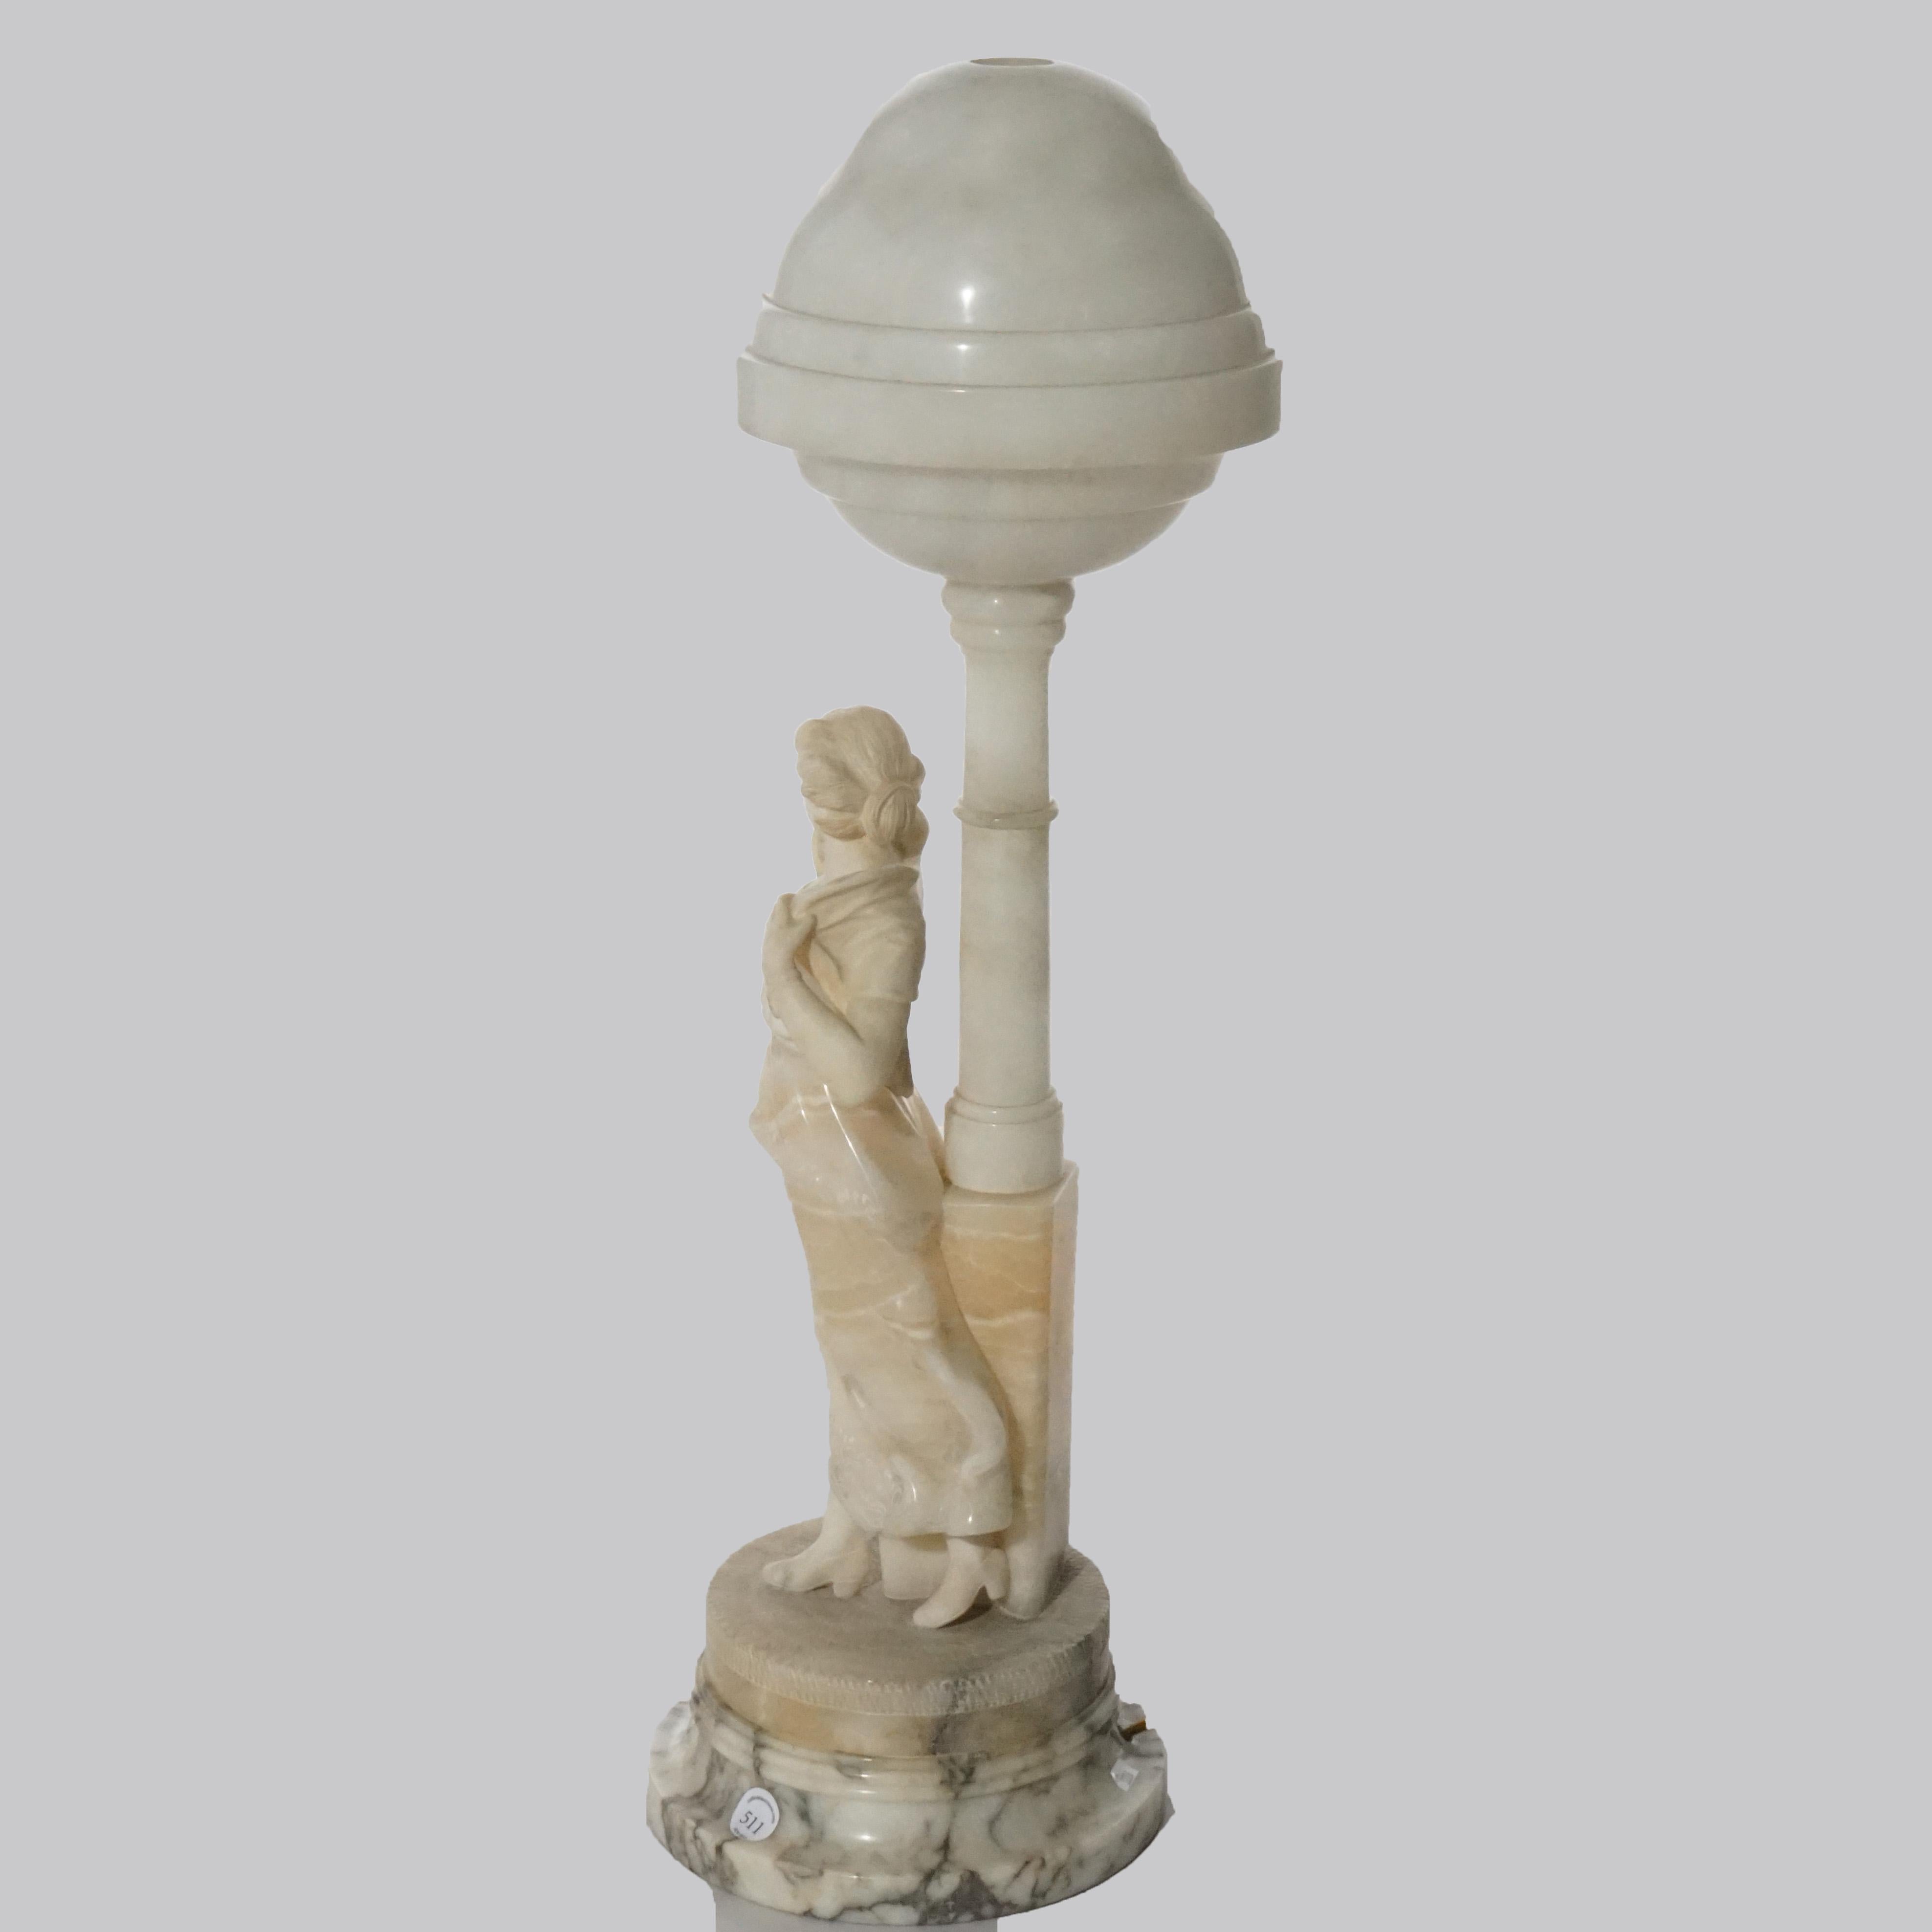 20th Century Antique Figural Carved Alabaster Lamp with a Classical Young Woman, c1900